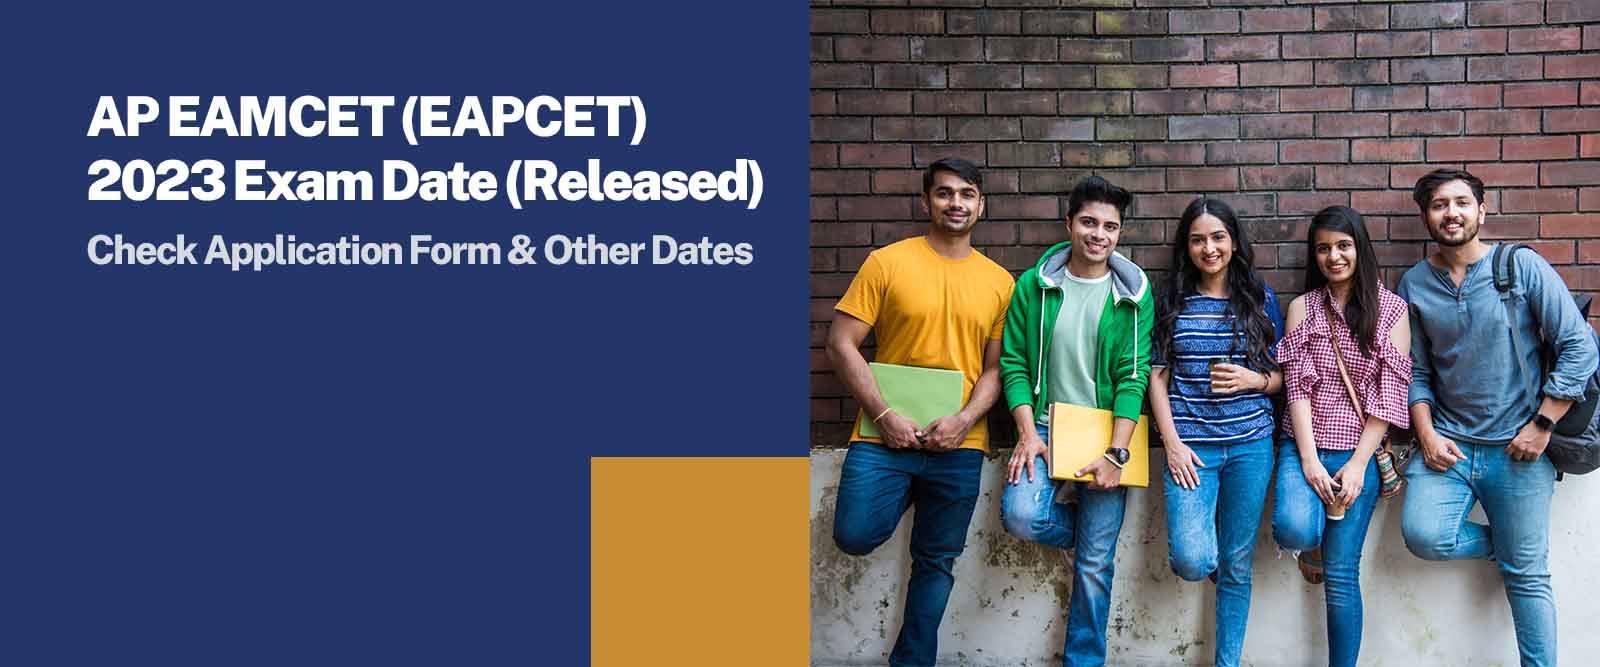 ap-eamcet-hall-ticket-2023-link-to-download-exam-date-and-exam-pattern